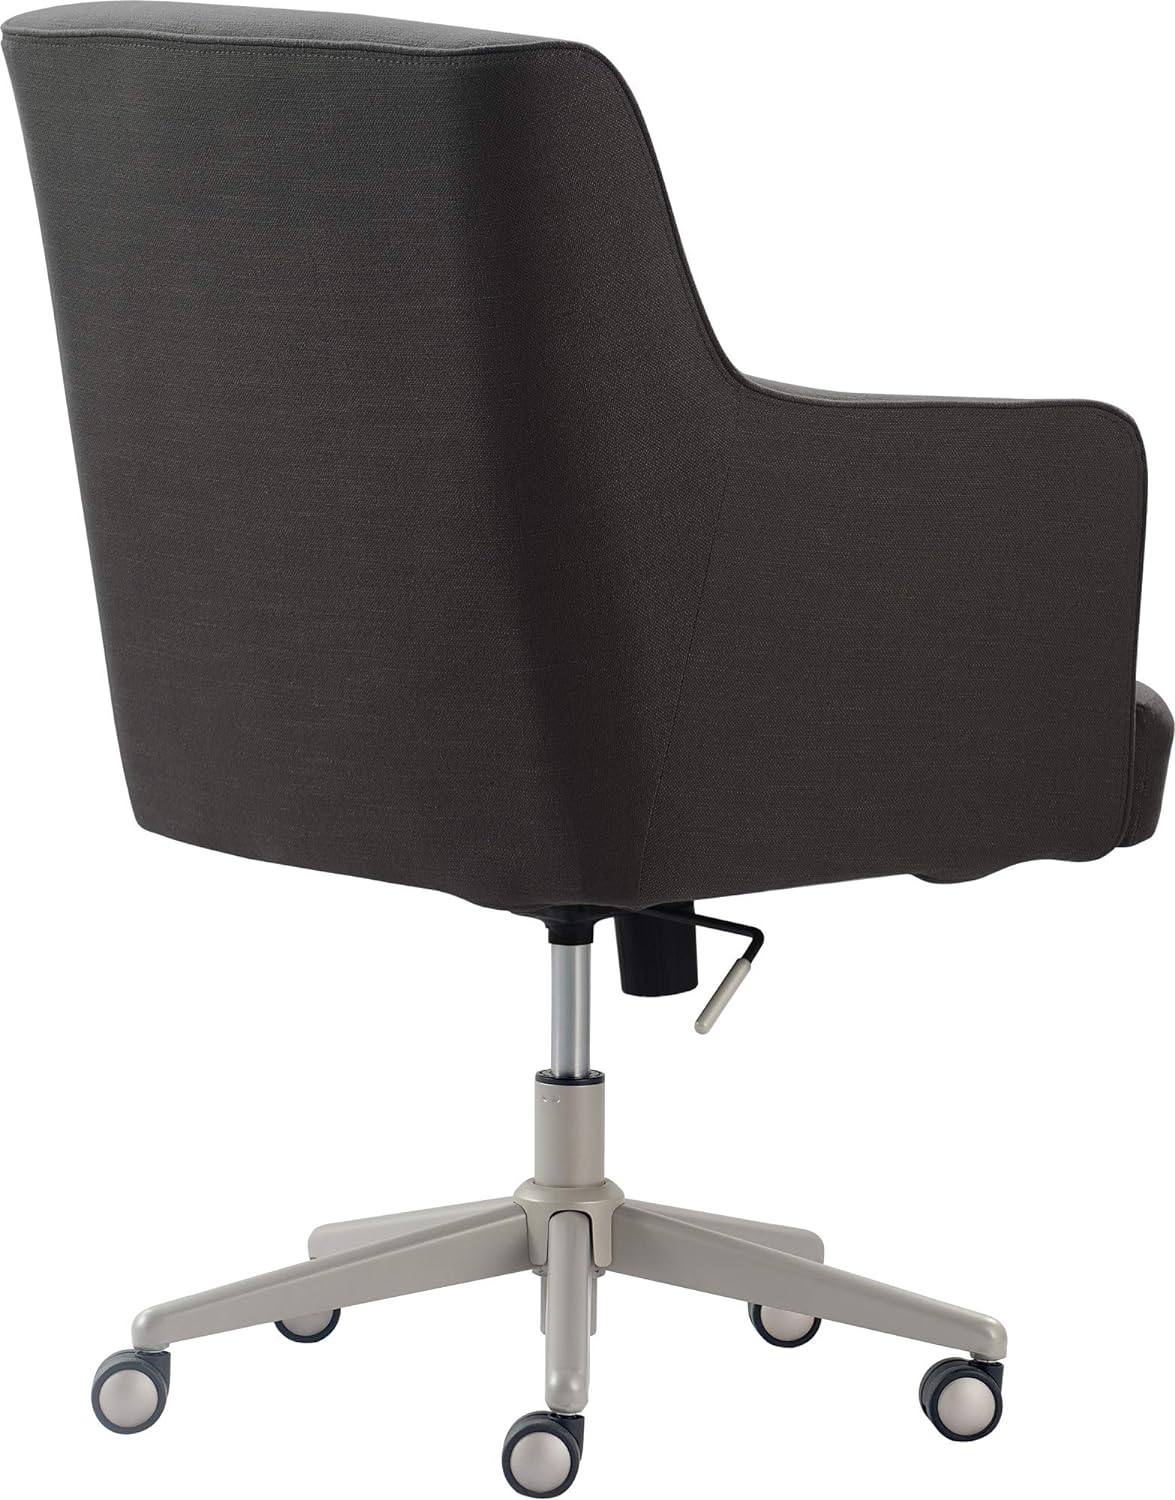 NEW in Box - Tommy Hilfiger Belmont Home Office Chair Adjustable Height and 360 Swivel for Computer Desk, Stainless Steel Base with Smooth Rolling Casters, Twill Fabric Upholstery, Twill Fabric Dark Gray - Retail $285